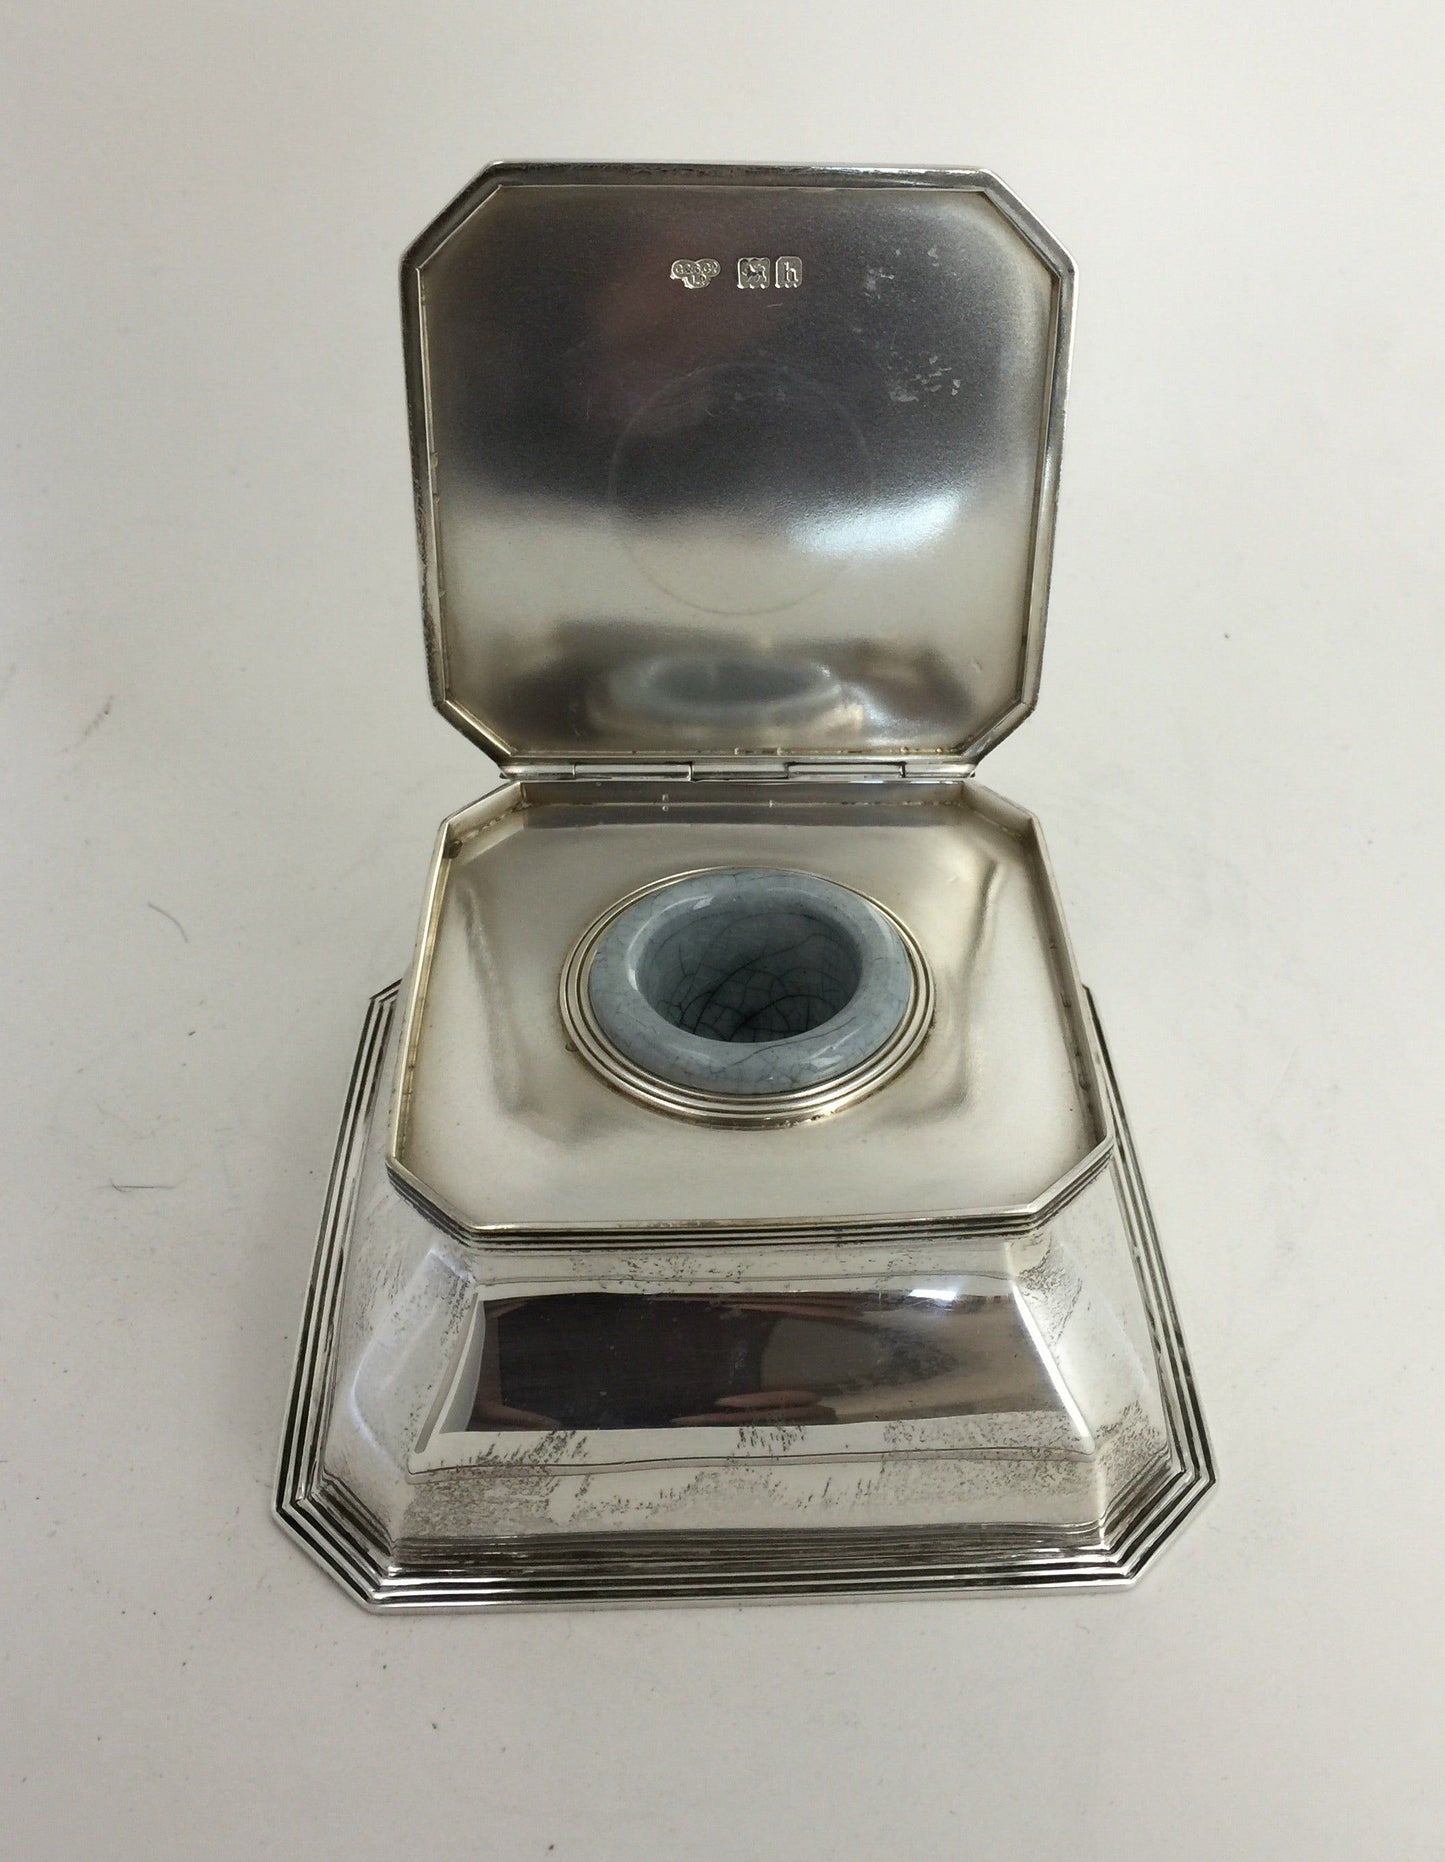 English Silver Inkwell, Stamped Goldsmiths and Silversmiths Company